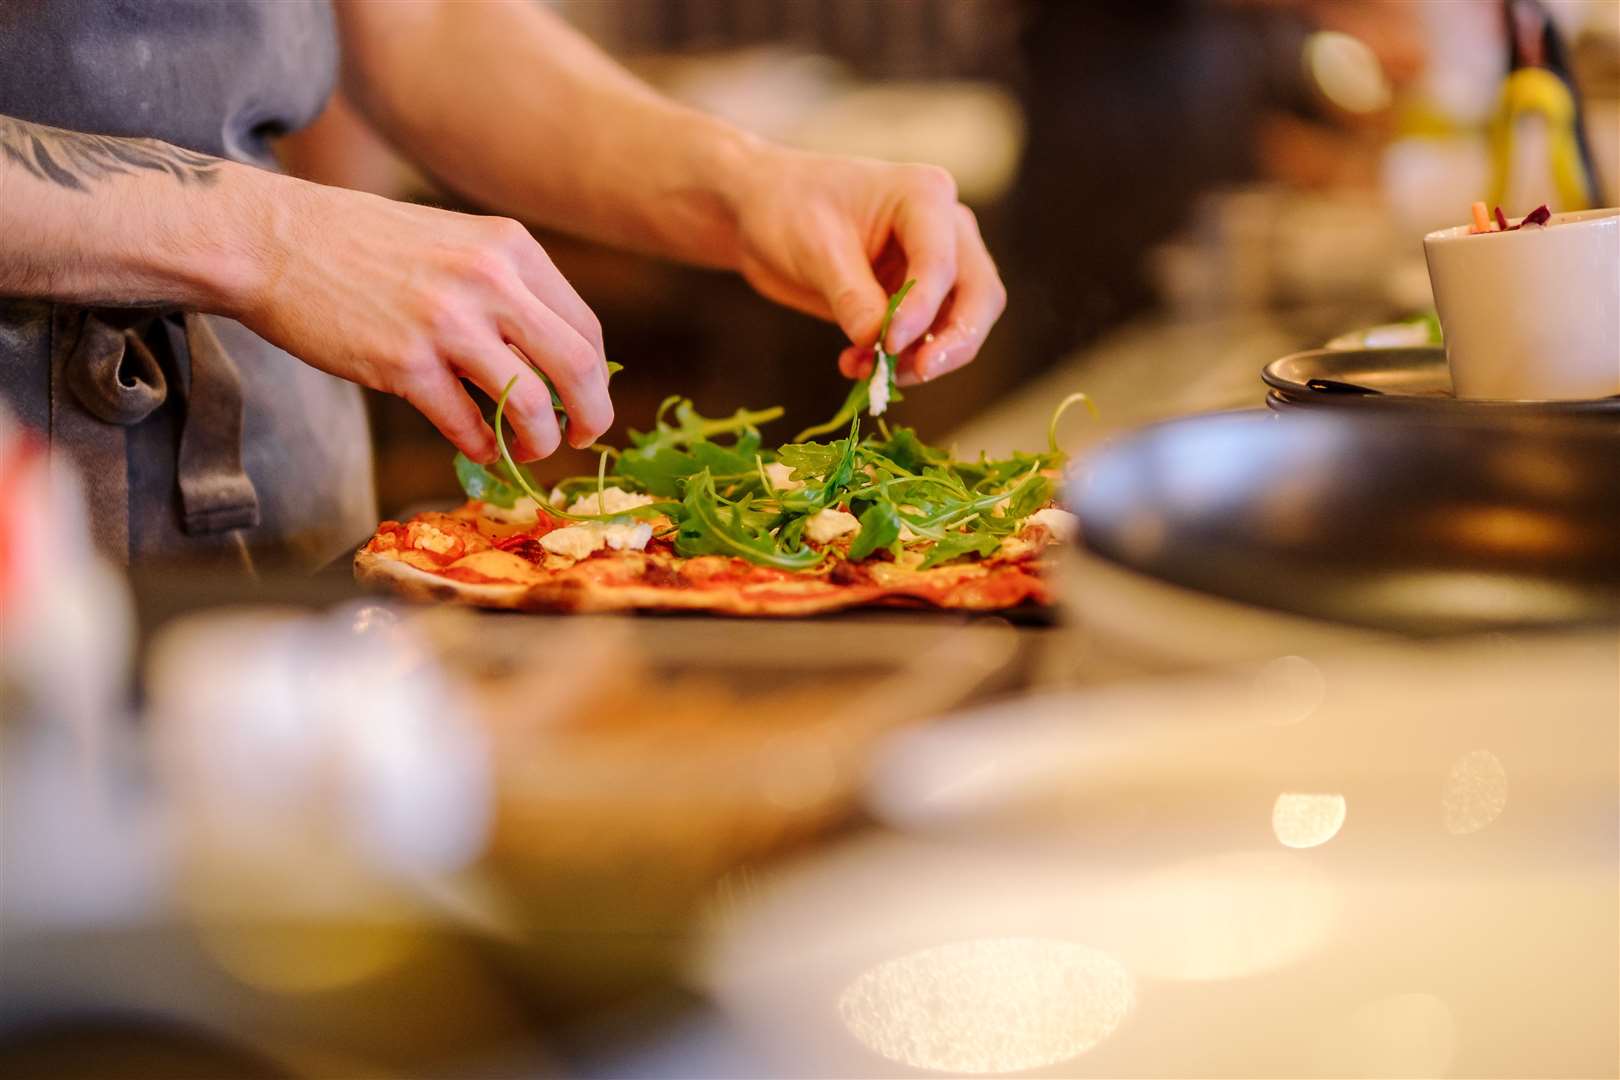 You can turn your Clubcard vouchers into money-off at Pizza Express